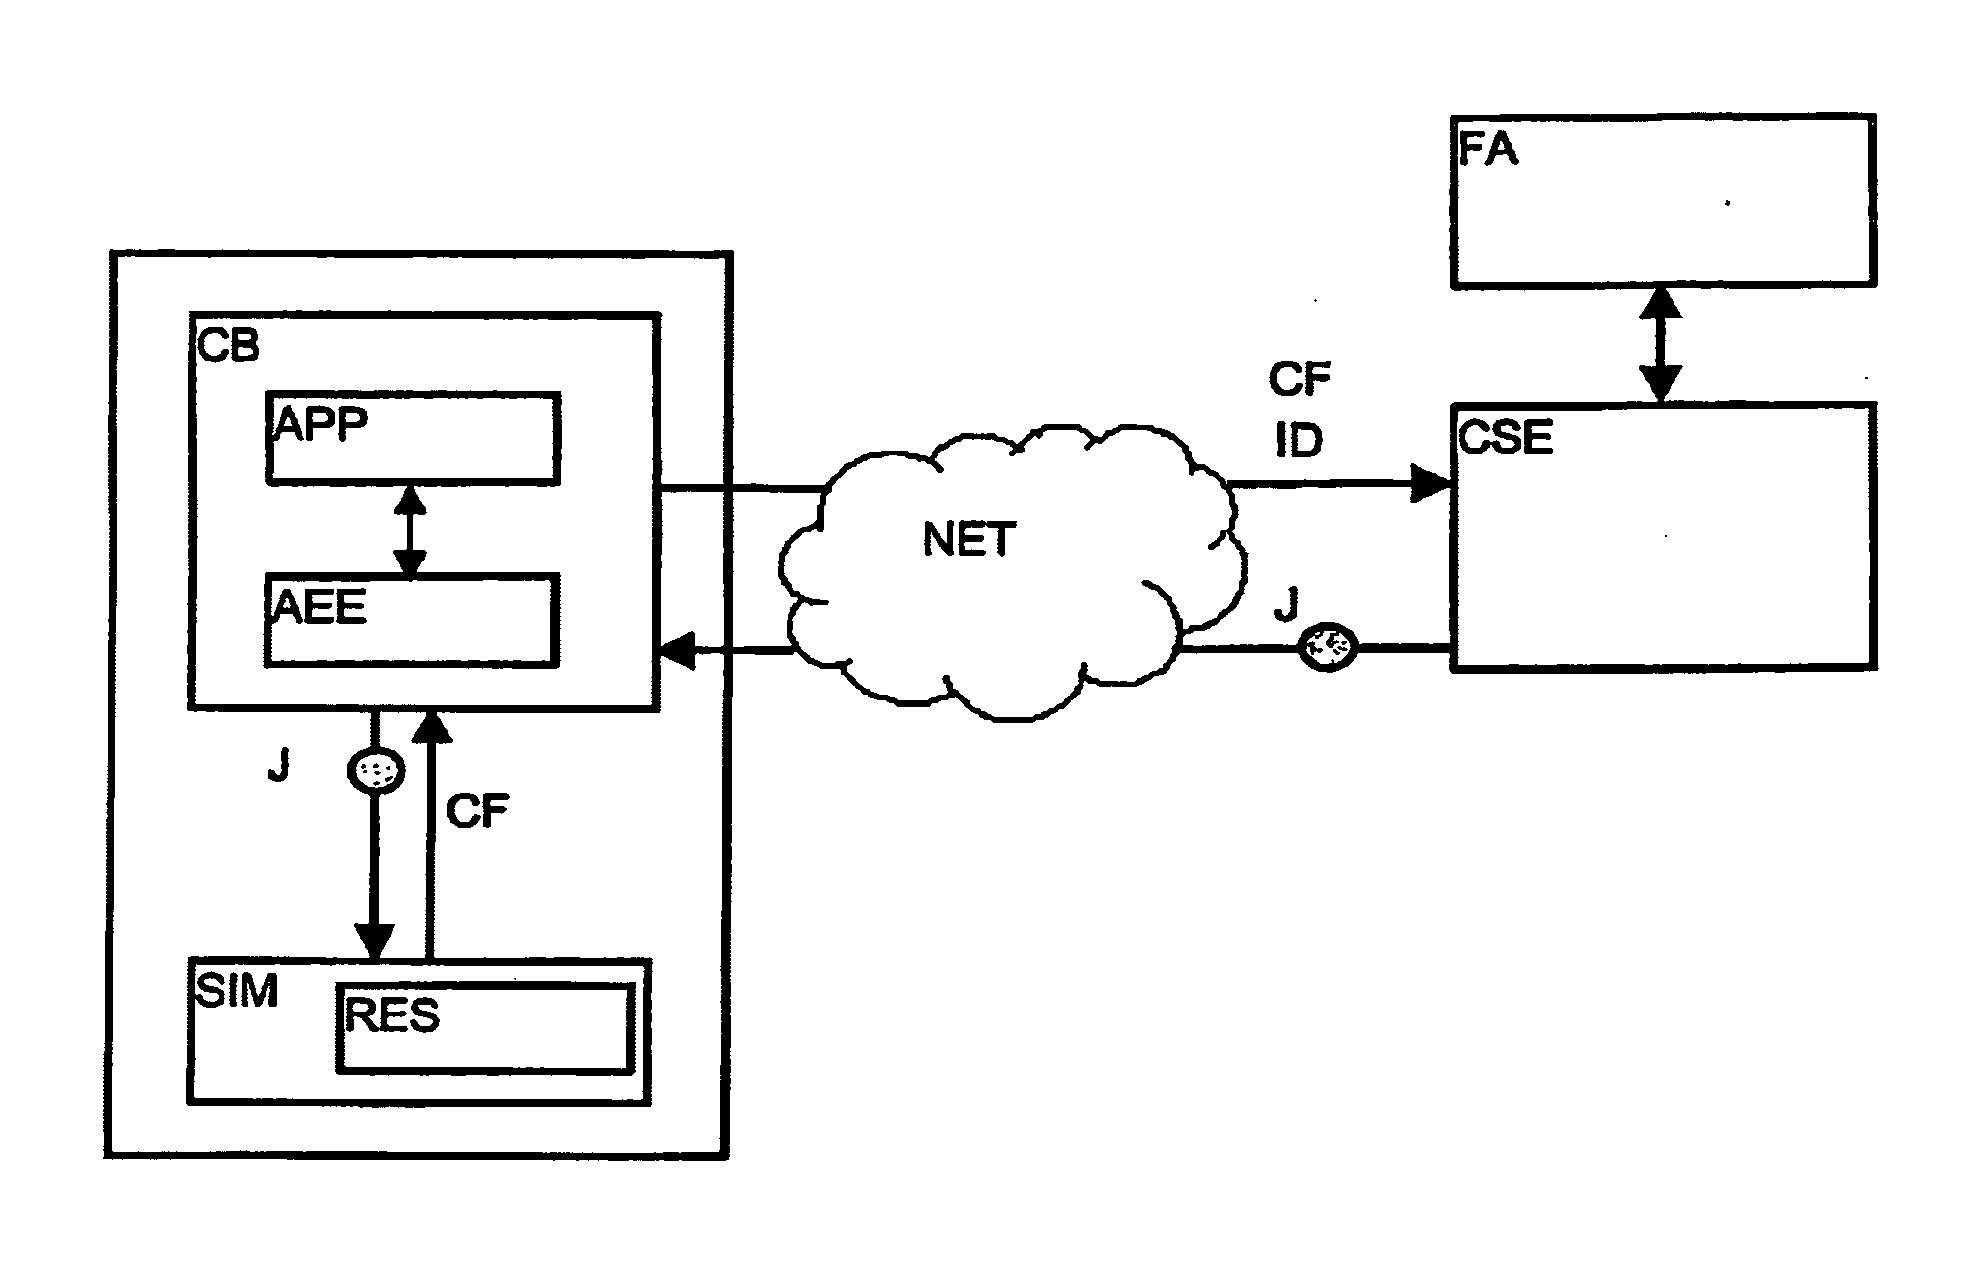 Method For Managing The Security Of Applications With A Security Module